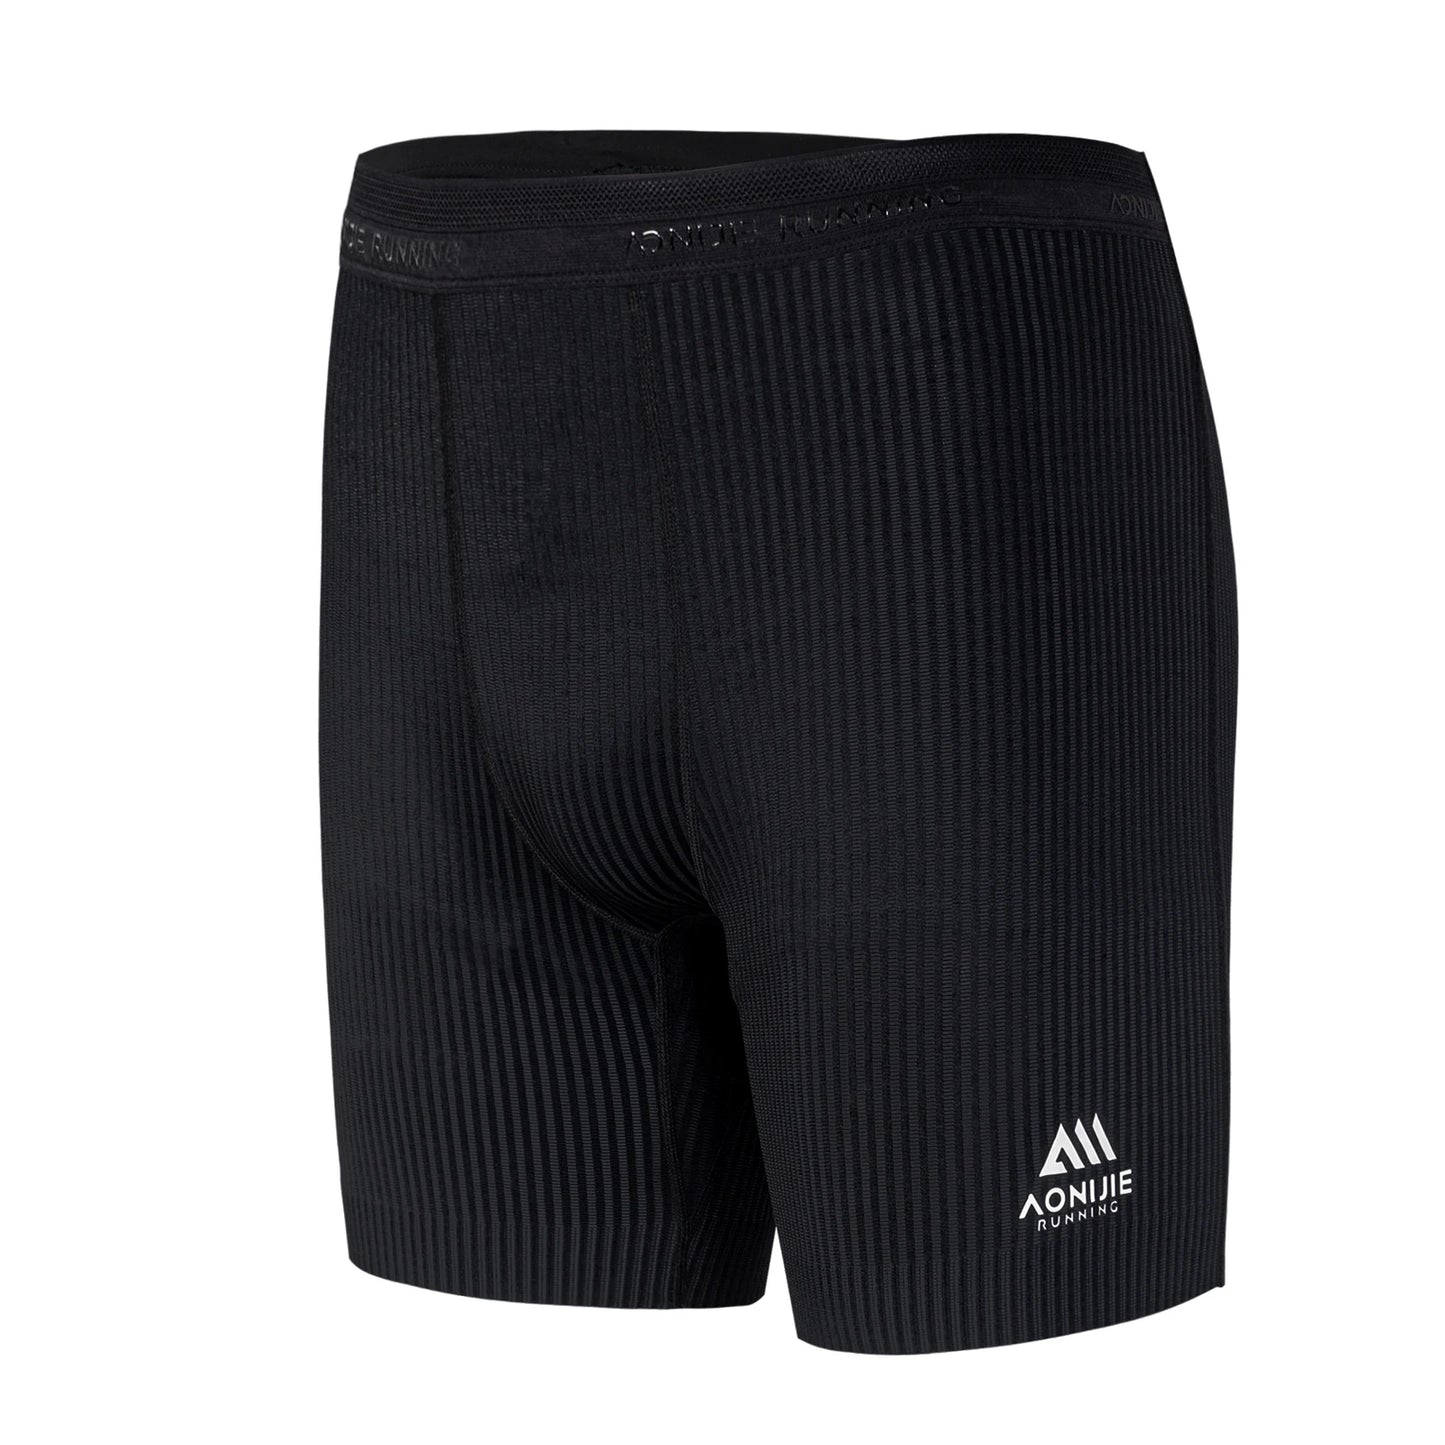 AONIJIE - Men's Breathable Shorts - Moisture-Wicking - FM5182